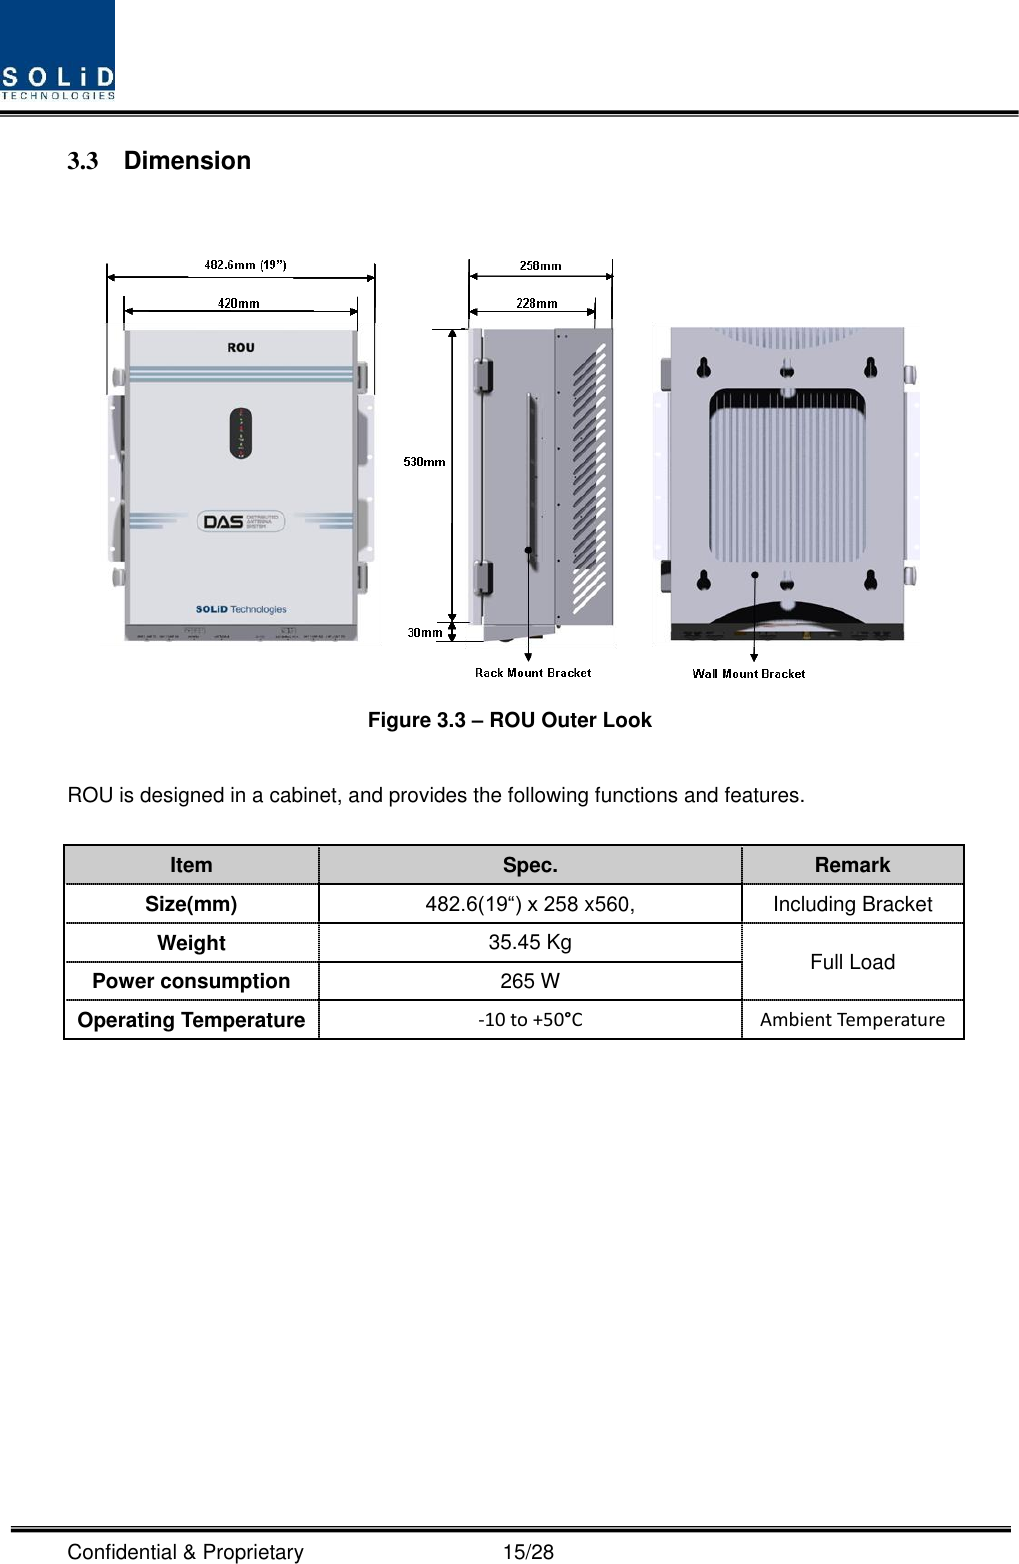  Confidential &amp; Proprietary                                      15/28 3.3  Dimension   Figure 3.3 – ROU Outer Look  ROU is designed in a cabinet, and provides the following functions and features.  Item Spec. Remark Size(mm) 482.6(19“) x 258 x560, Including Bracket Weight 35.45 Kg Full Load Power consumption 265 W Operating Temperature -10 to +50°C Ambient Temperature  